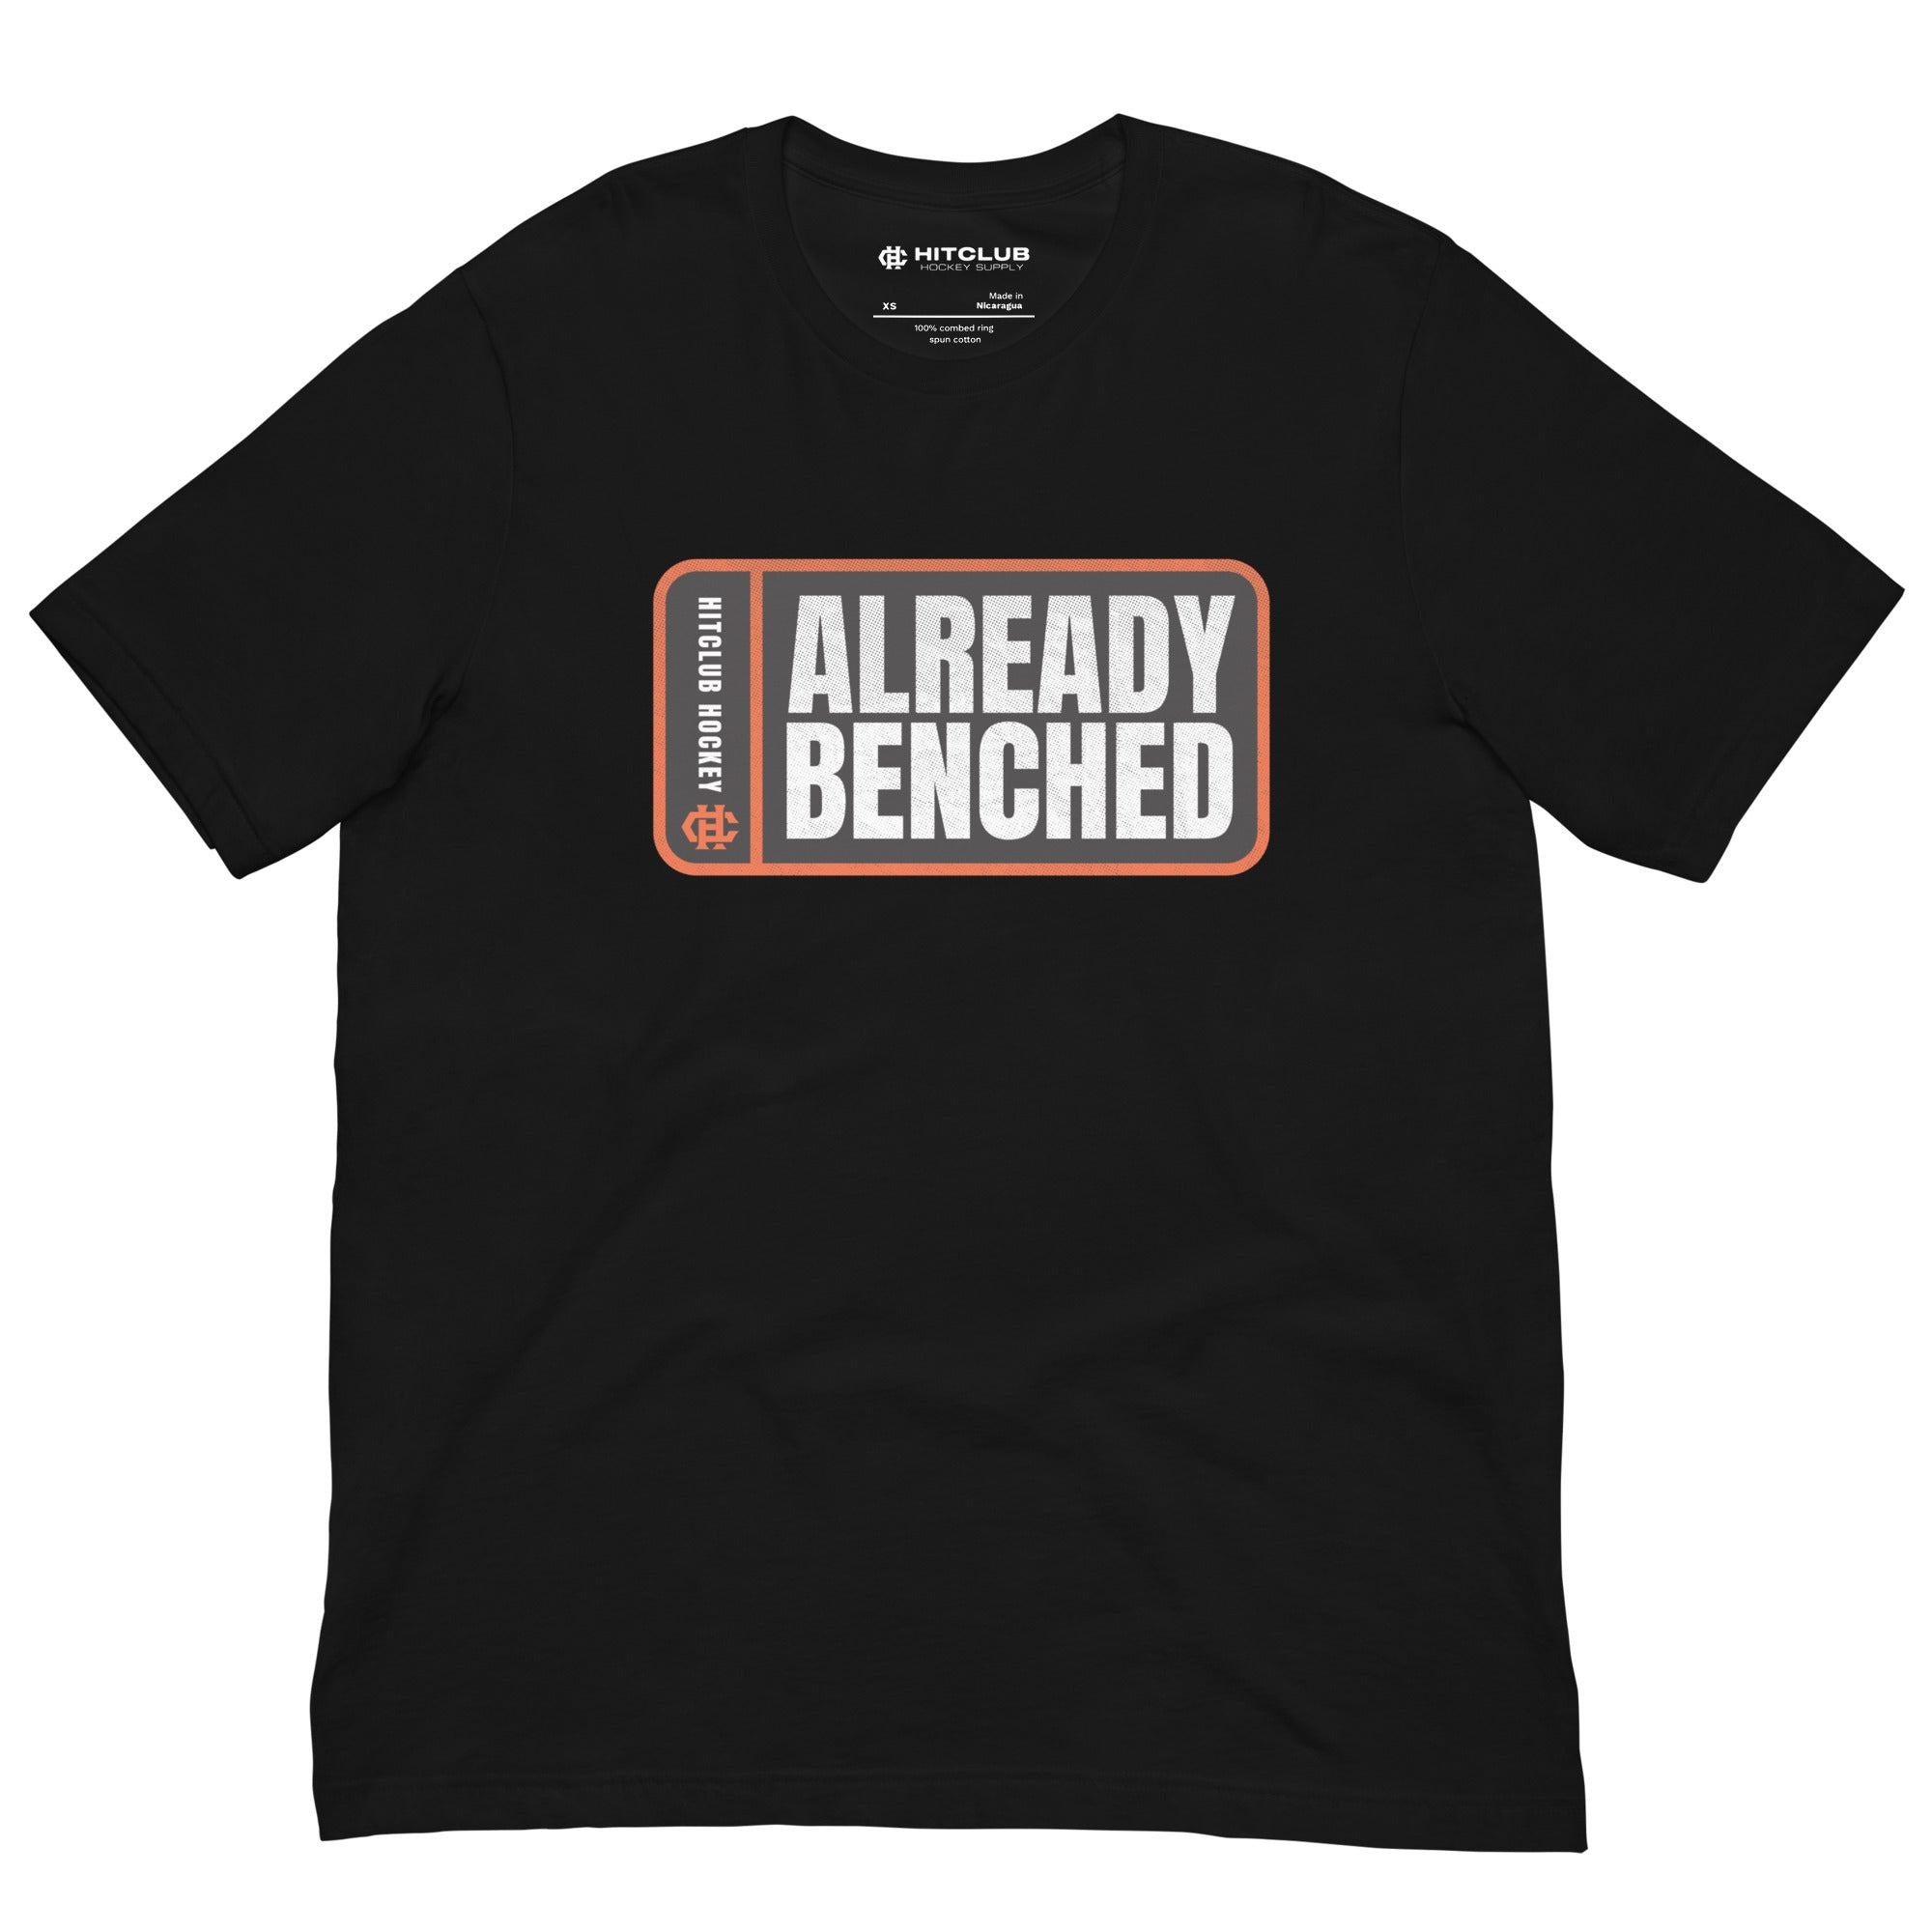 Already Benched – Tee